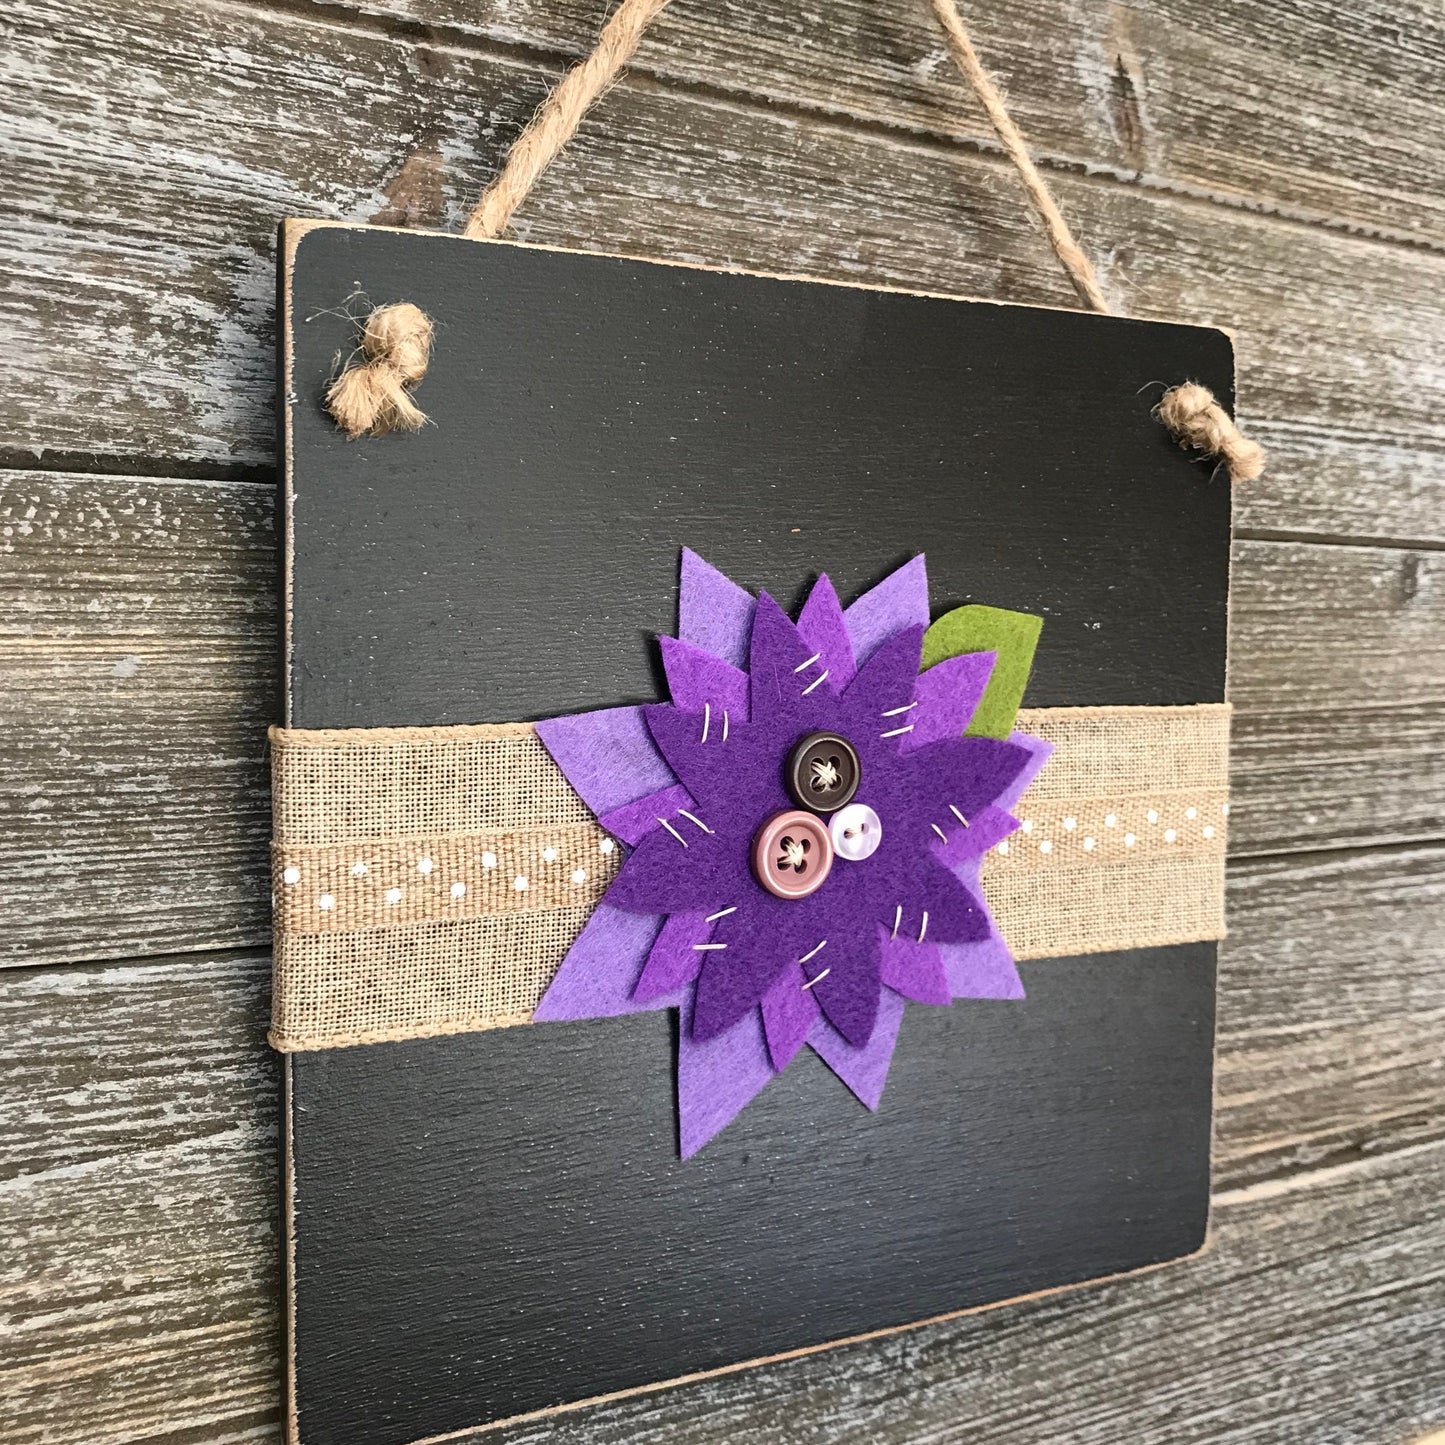 Felt Flower Wall Decor - Black and Purple Flower with Buttons